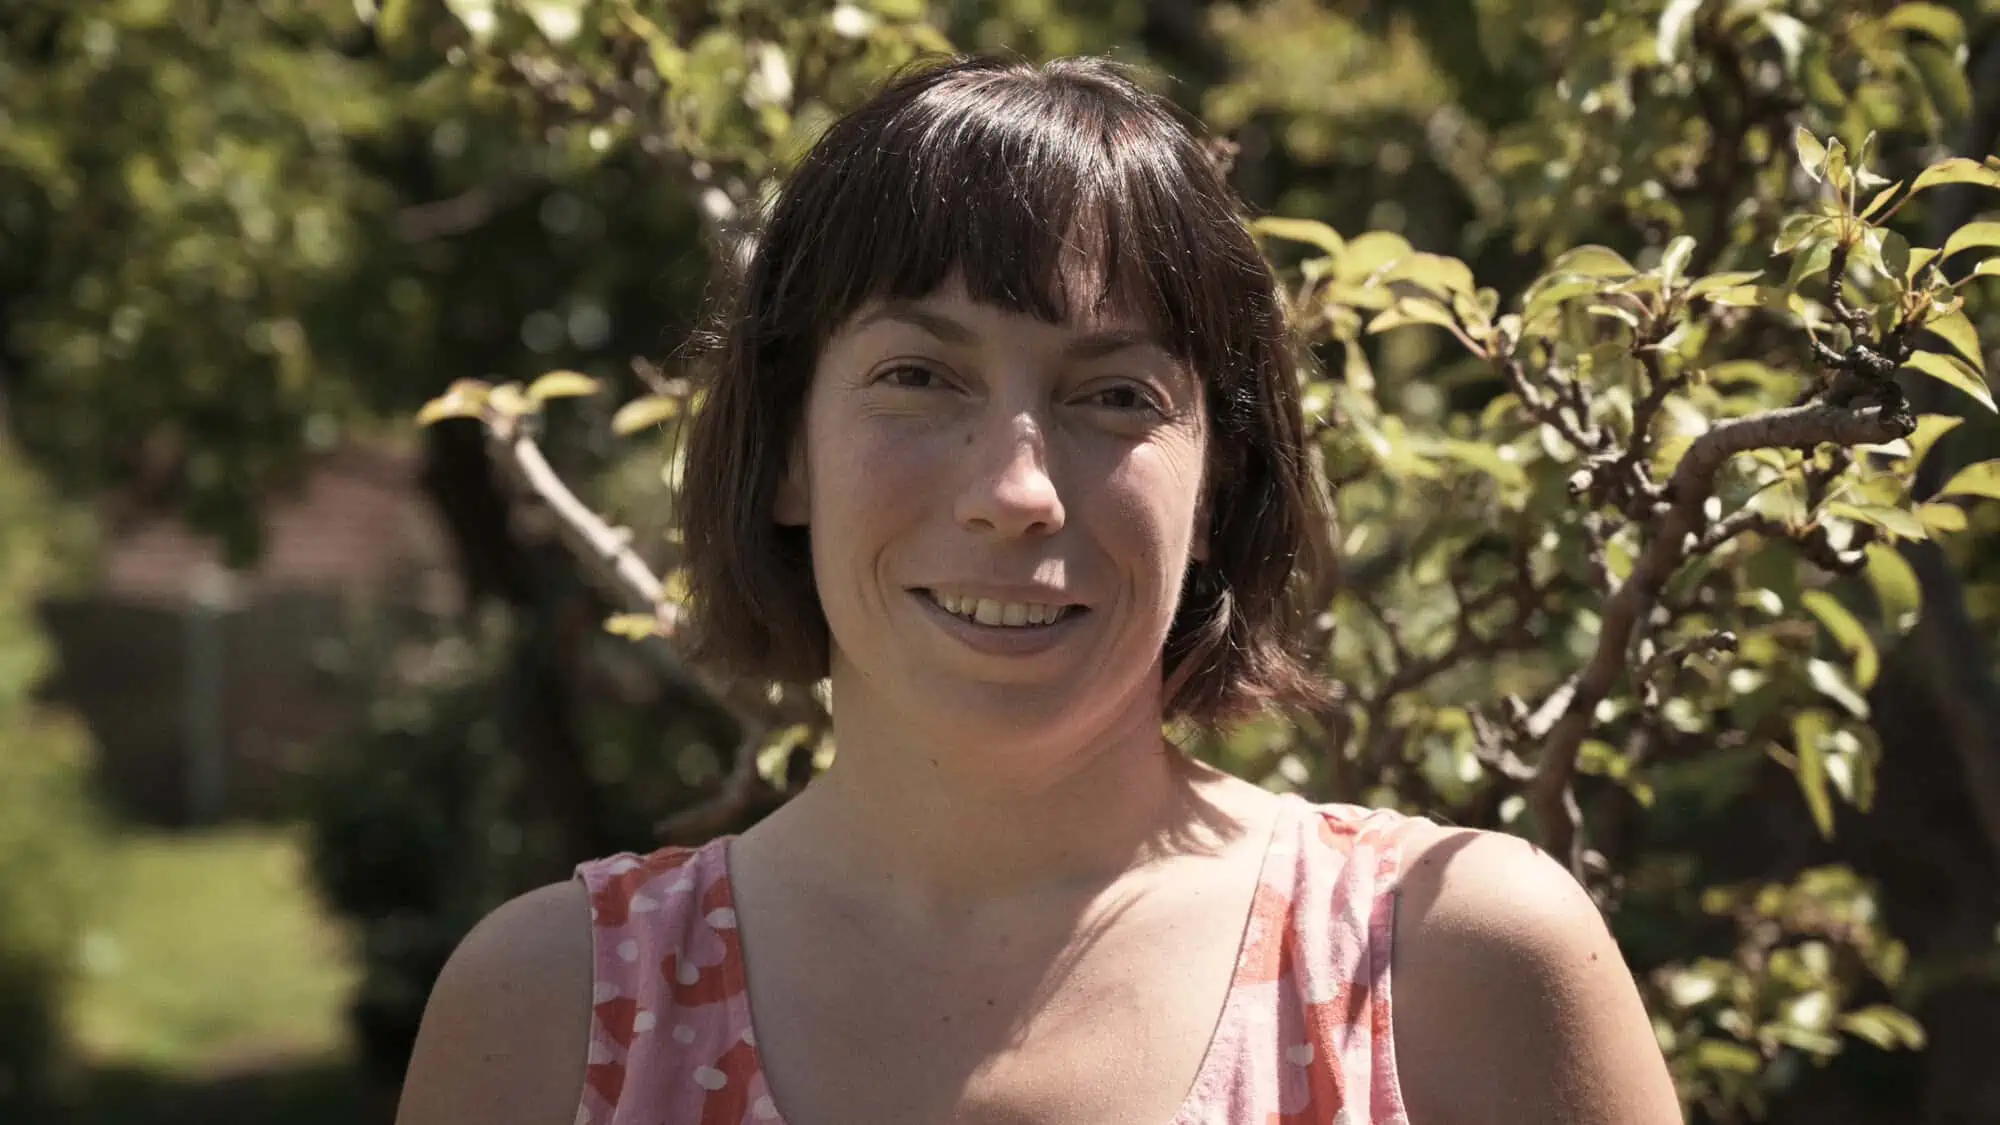 Image Description: A landscape format image. A head and shoulders portrait of Elizabeth Wright in front of an out of focus background of trees.